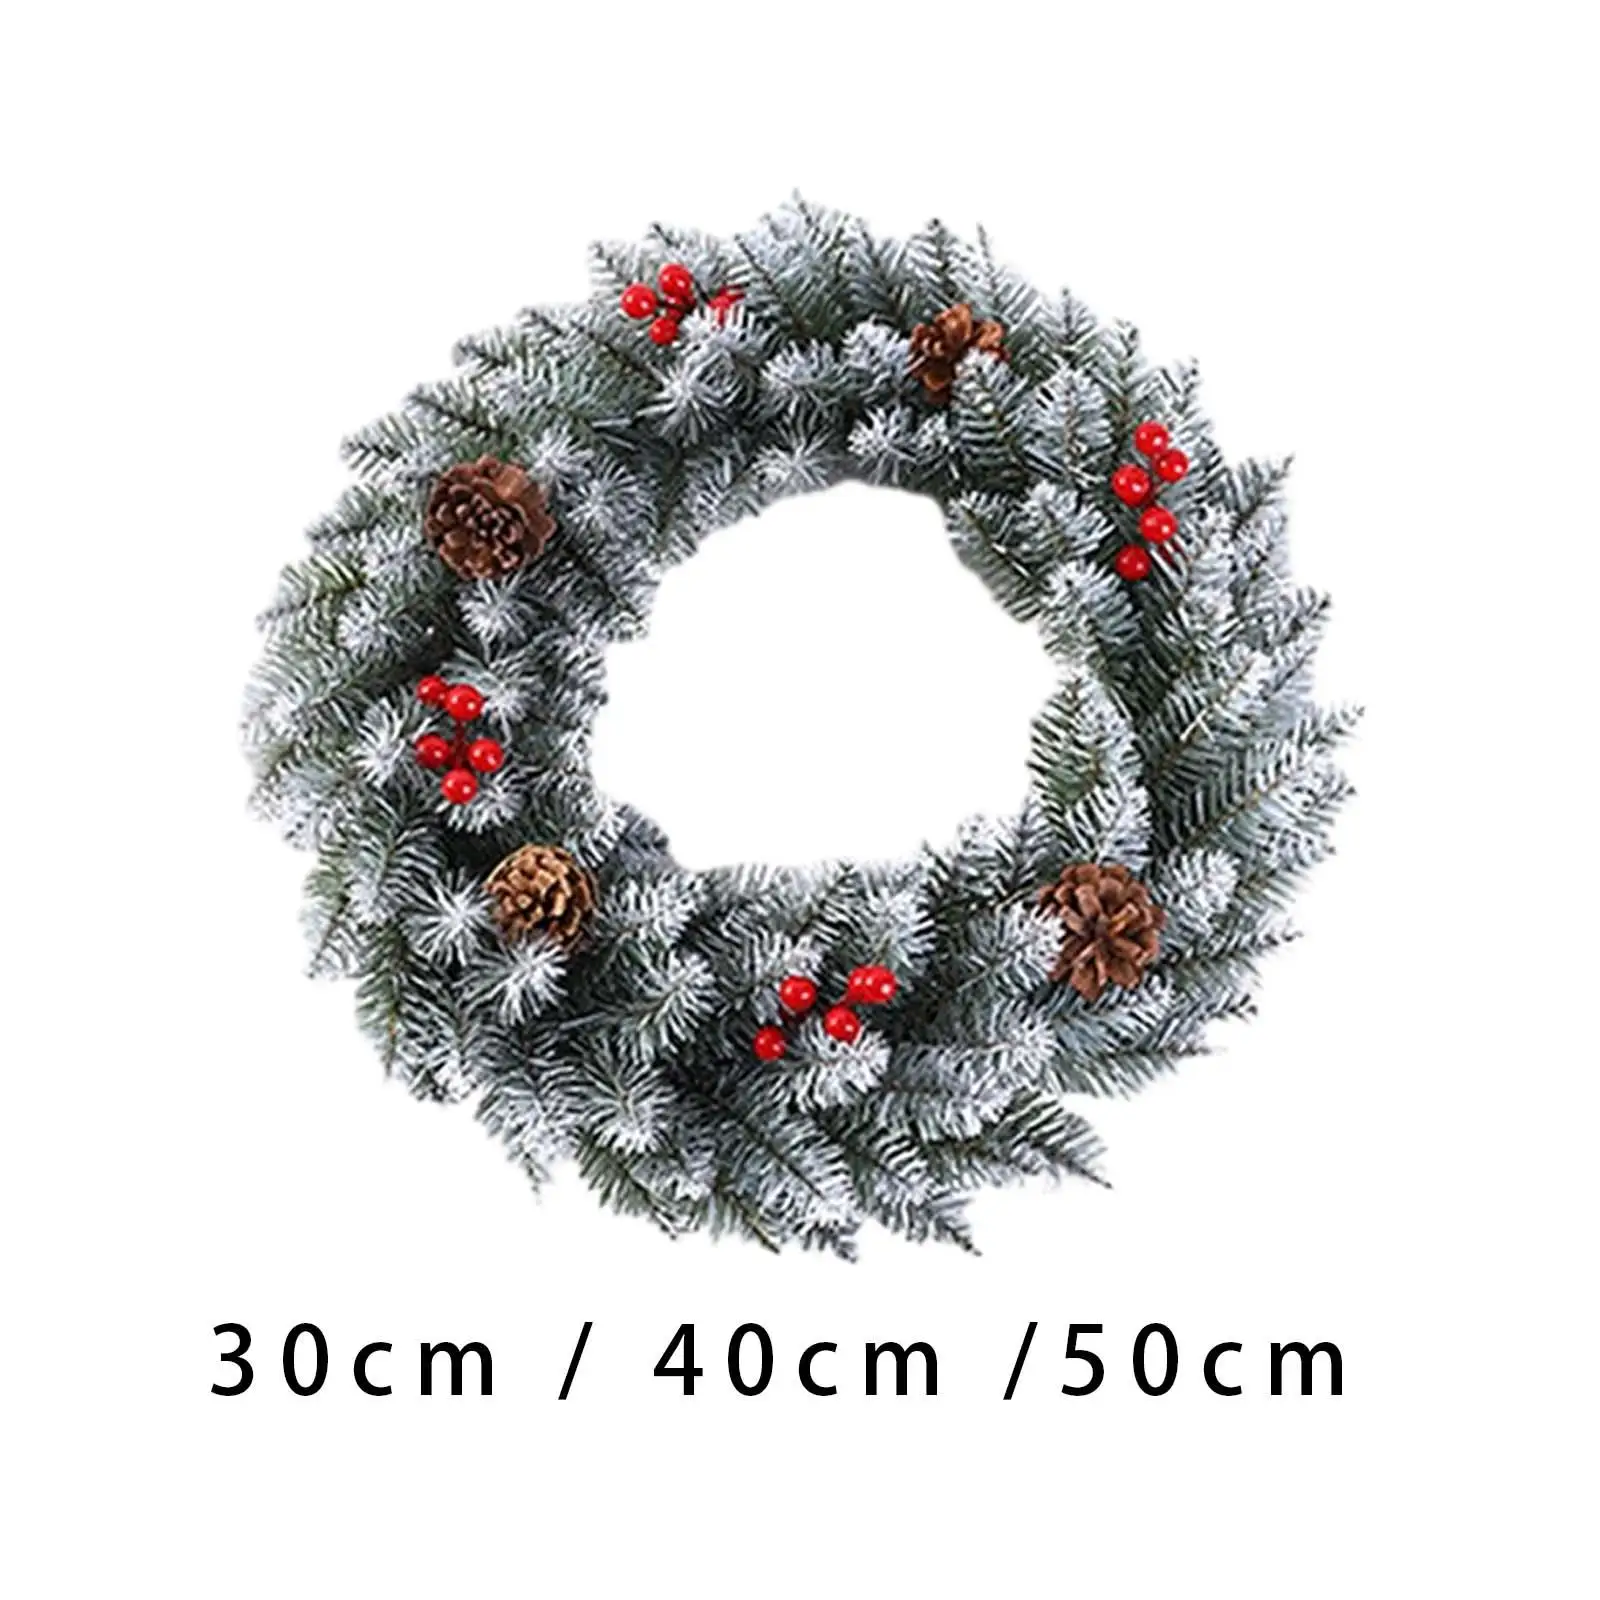 Artificial Christmas Wreath Holiday Garland for Bedroom Office Balcony